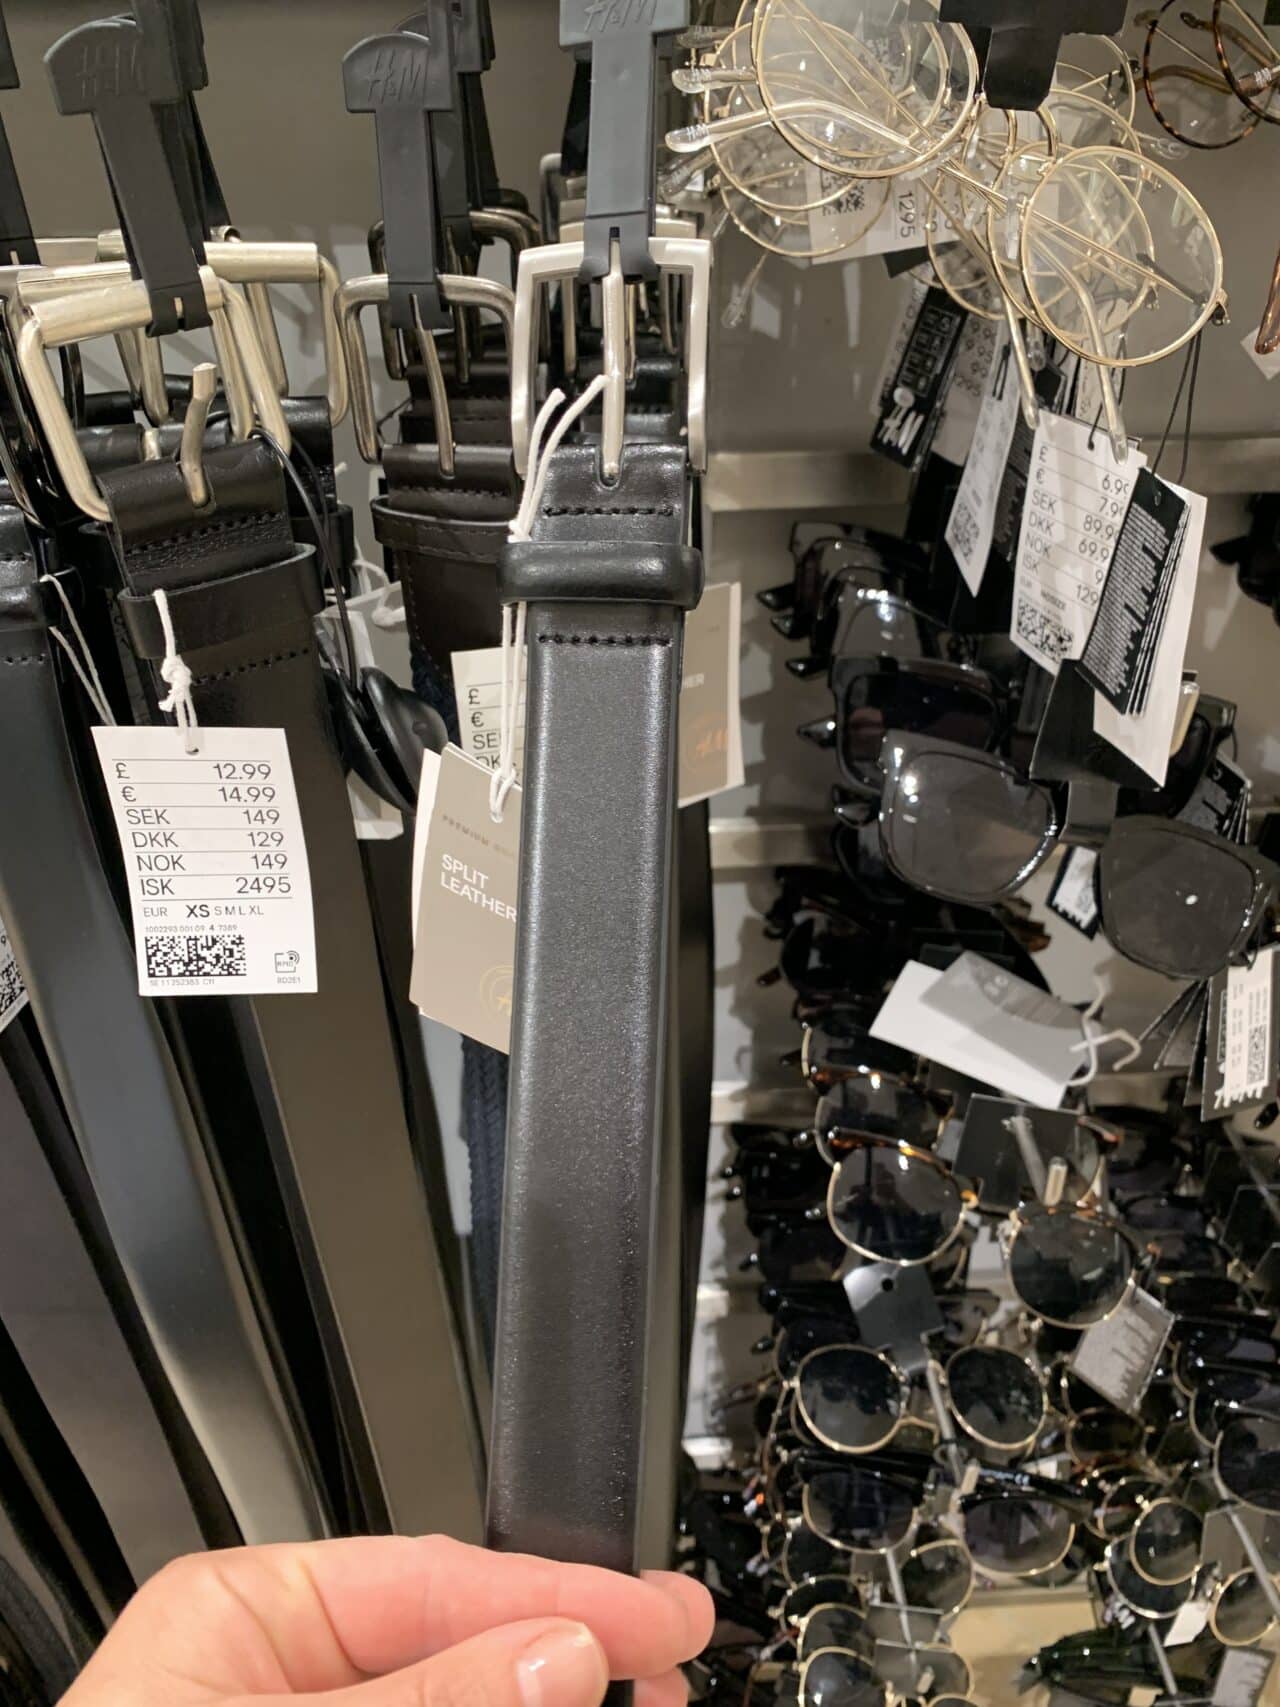 Store Rack With Black Belts And Glasses With Price Tags